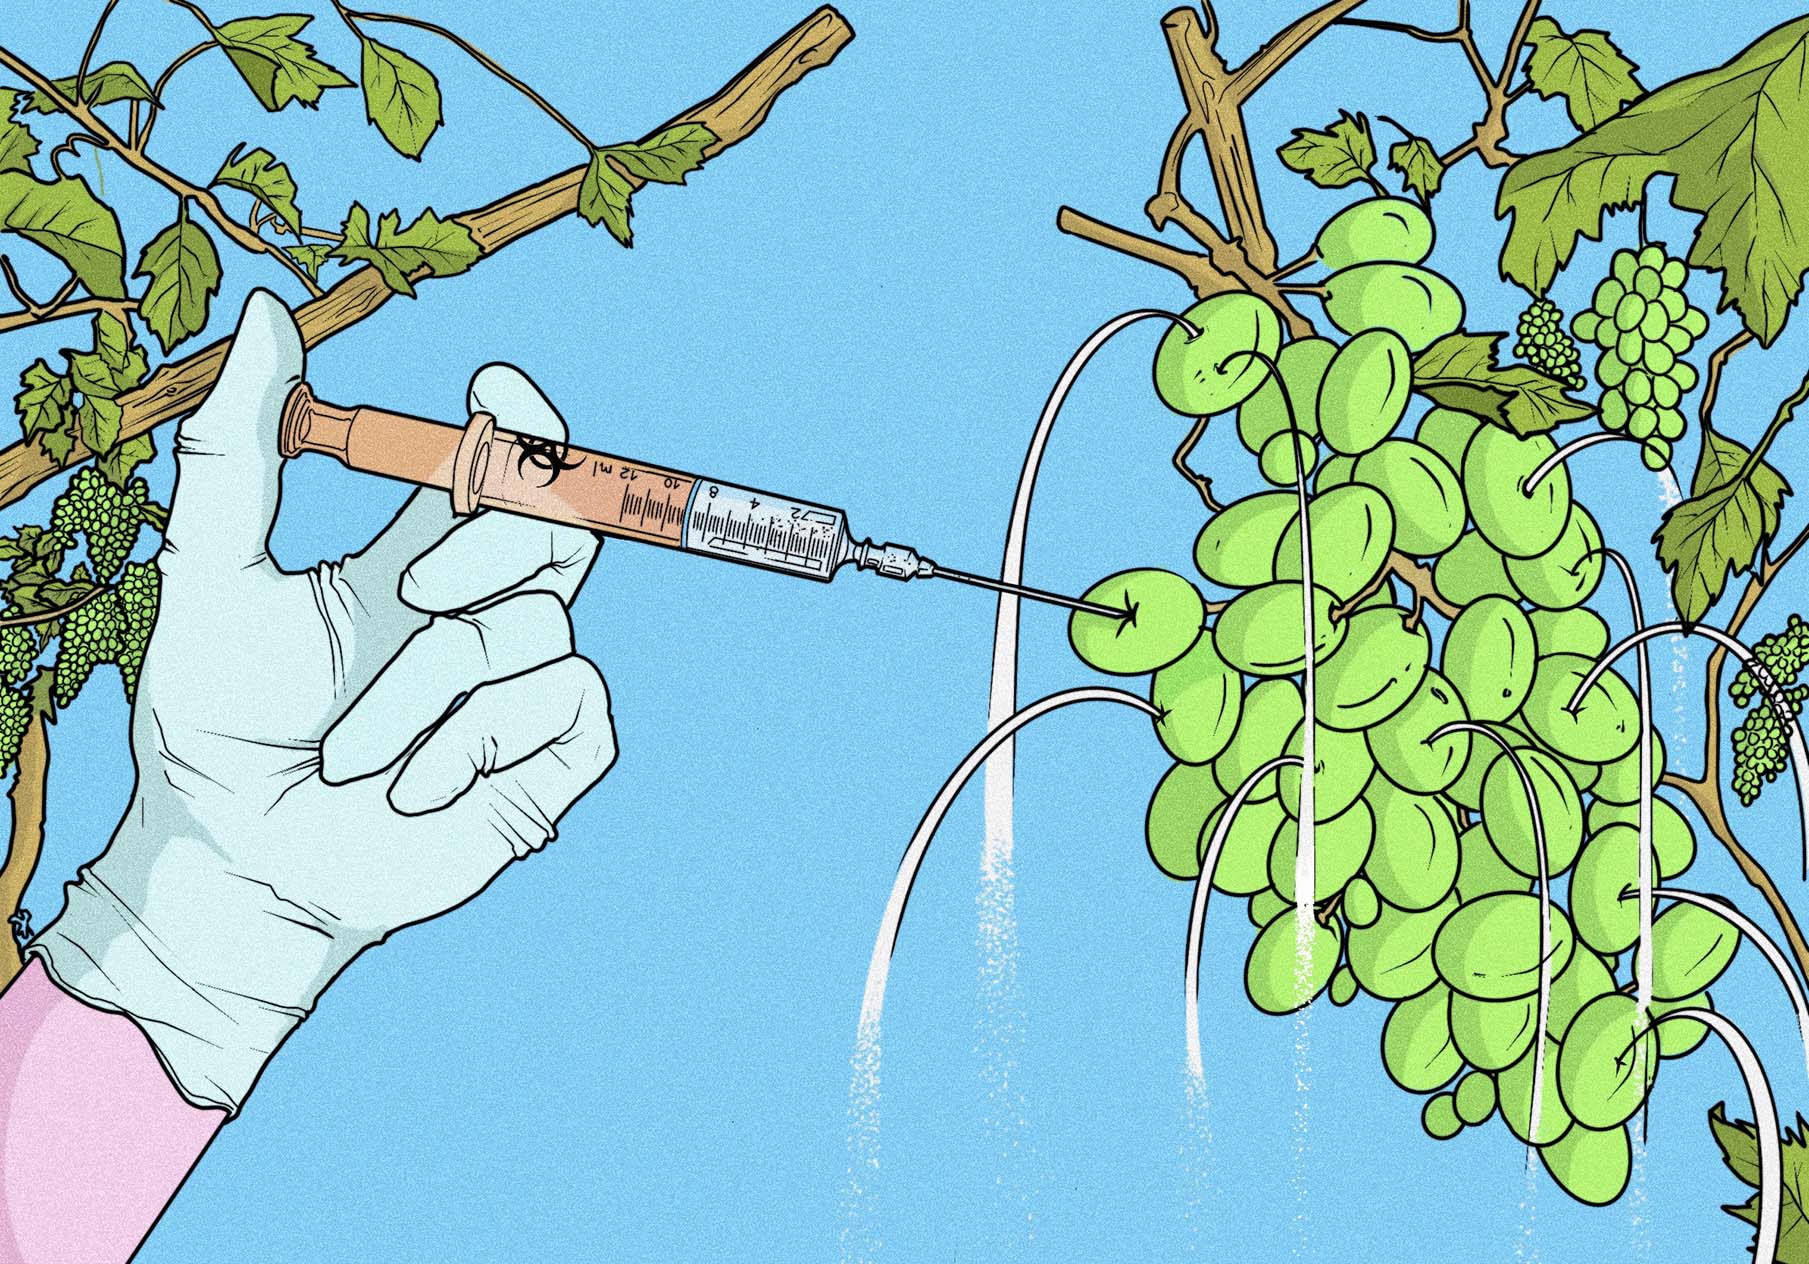 BA Illustration work by Catherine Perkins showing a speculative illustration for an article that narrates the toxic truth about modern food. A gloved hand is seen injecting a bunch of hanging grapes.